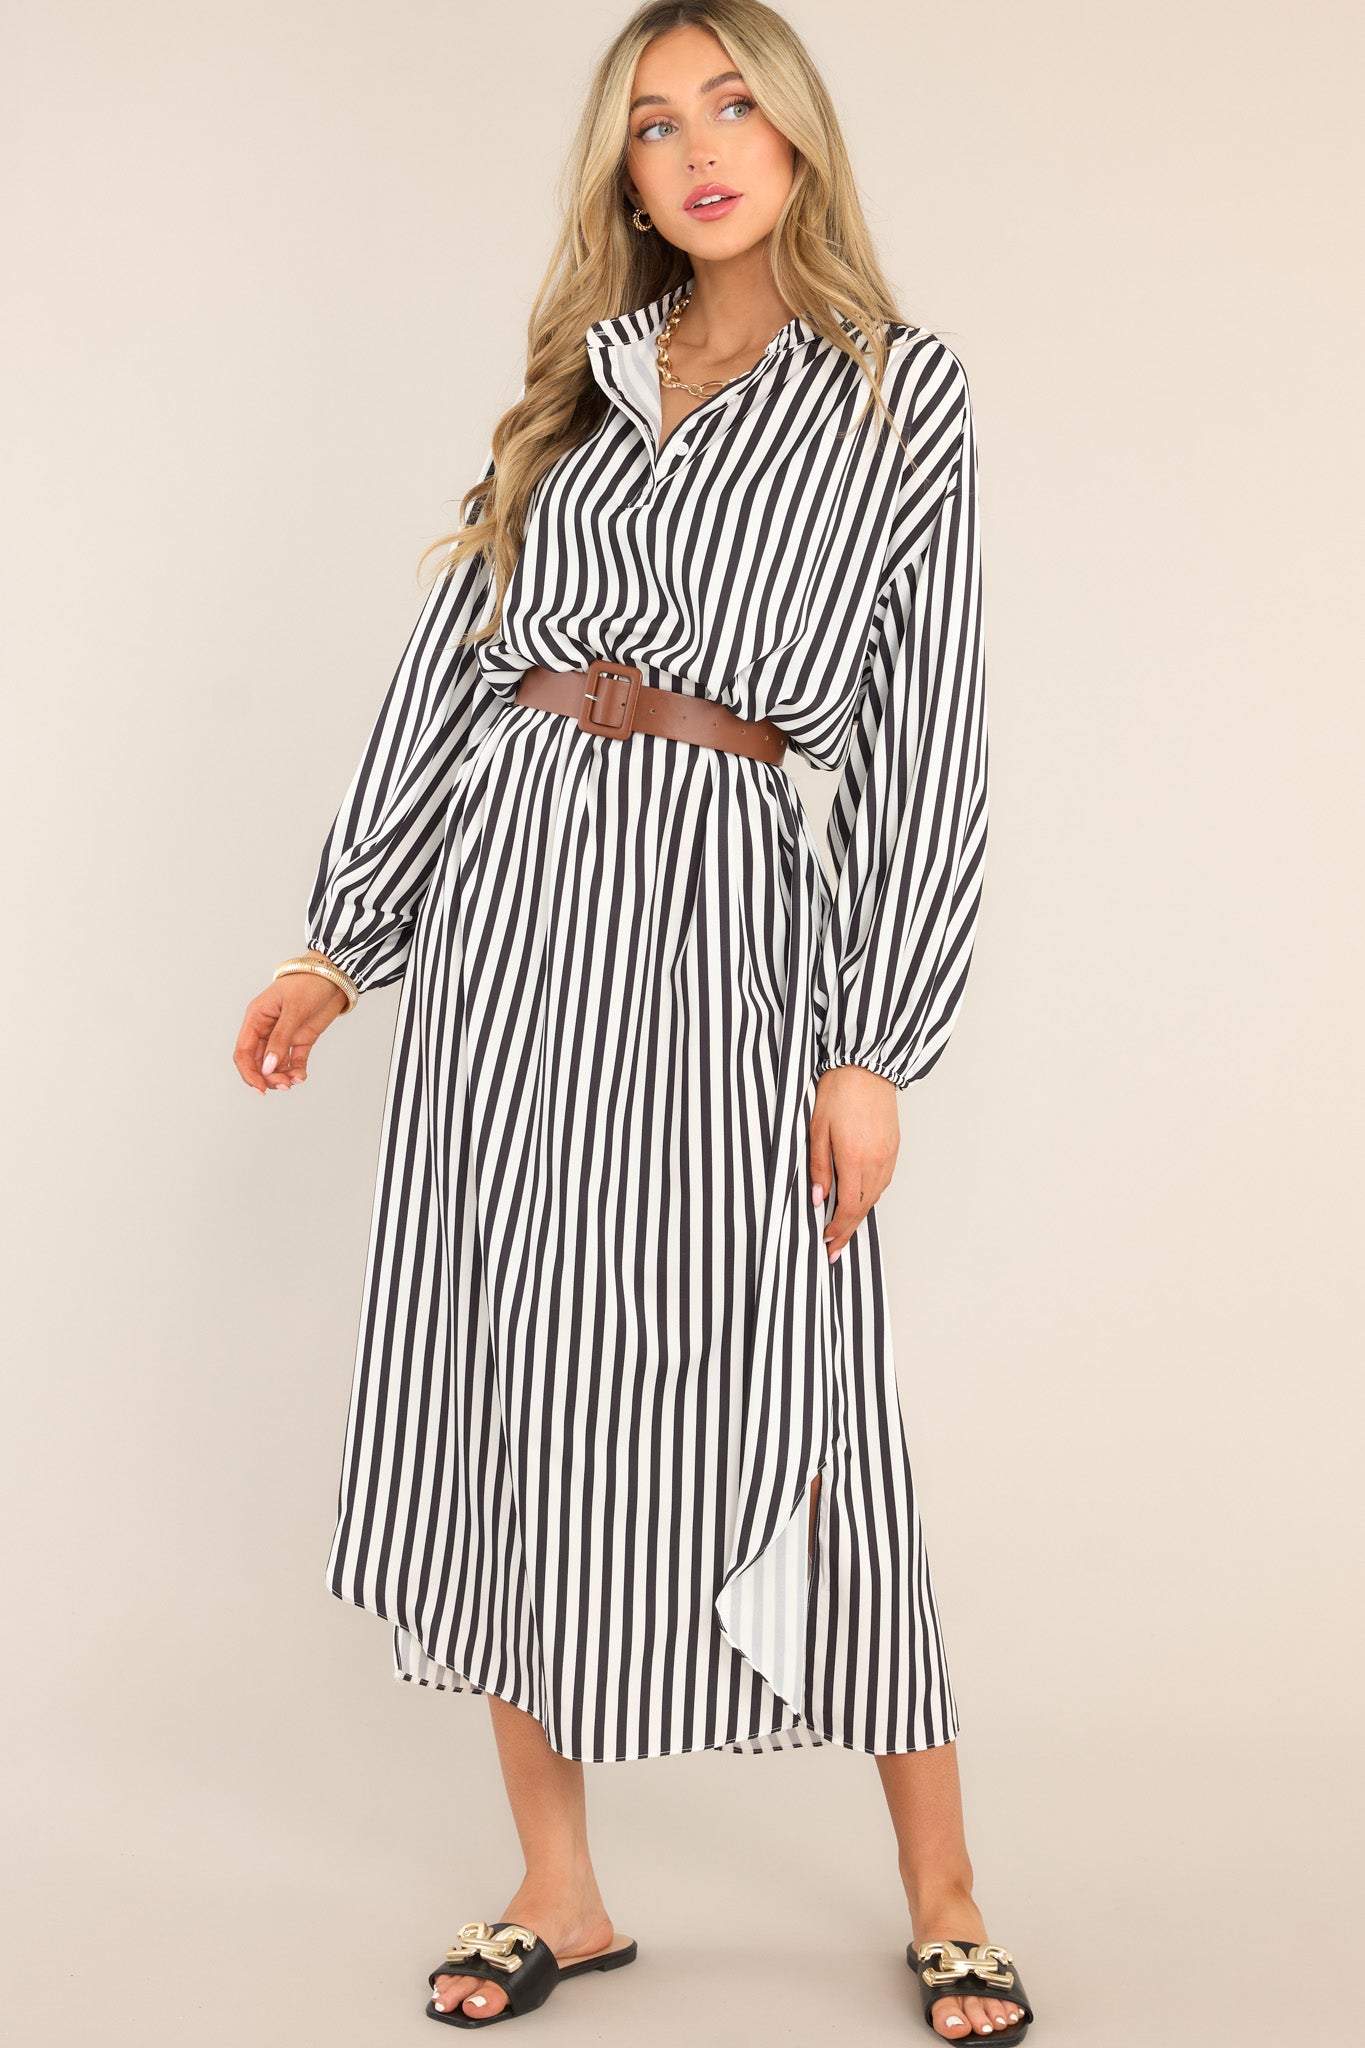 This black and white dress features a crew neckline, dropped shoulders, functional buttons, hip pockets, a functional belt, elastic cuffed long sleeves, and a split hemline.